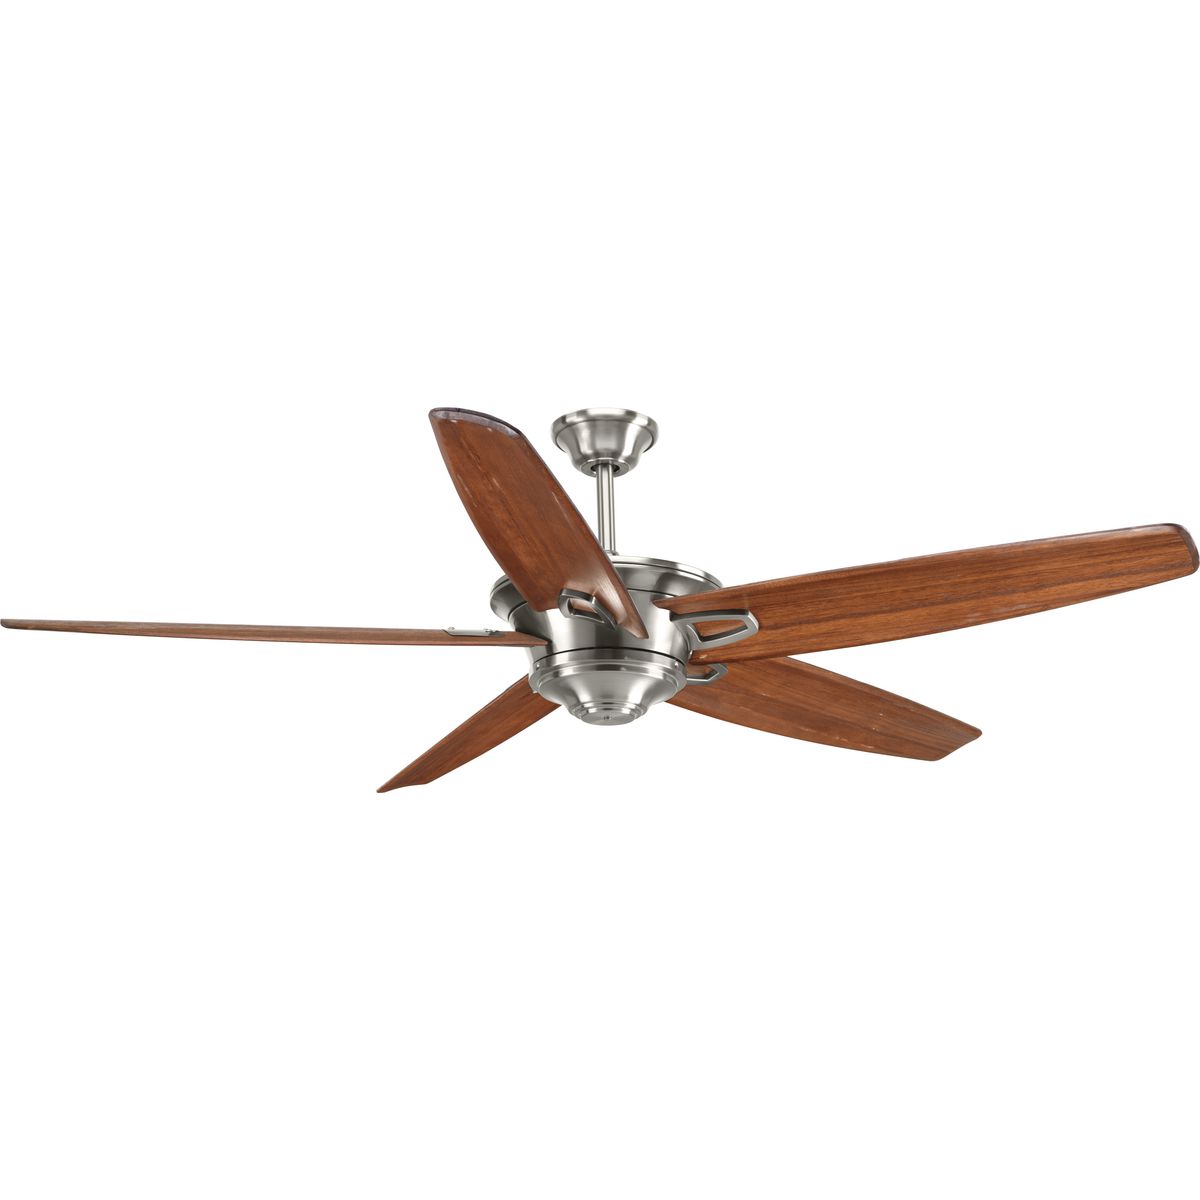 Beautiful and expansive in design, the 68 inch Caleb ceiling fan is ideal for use in large spaces. Bent Carved Wood medium cherry blades are paired with a Brushed Nickel finish. Caleb features a dual mount system and is compatible with universal light kits. A full function remote control with batteries is included.